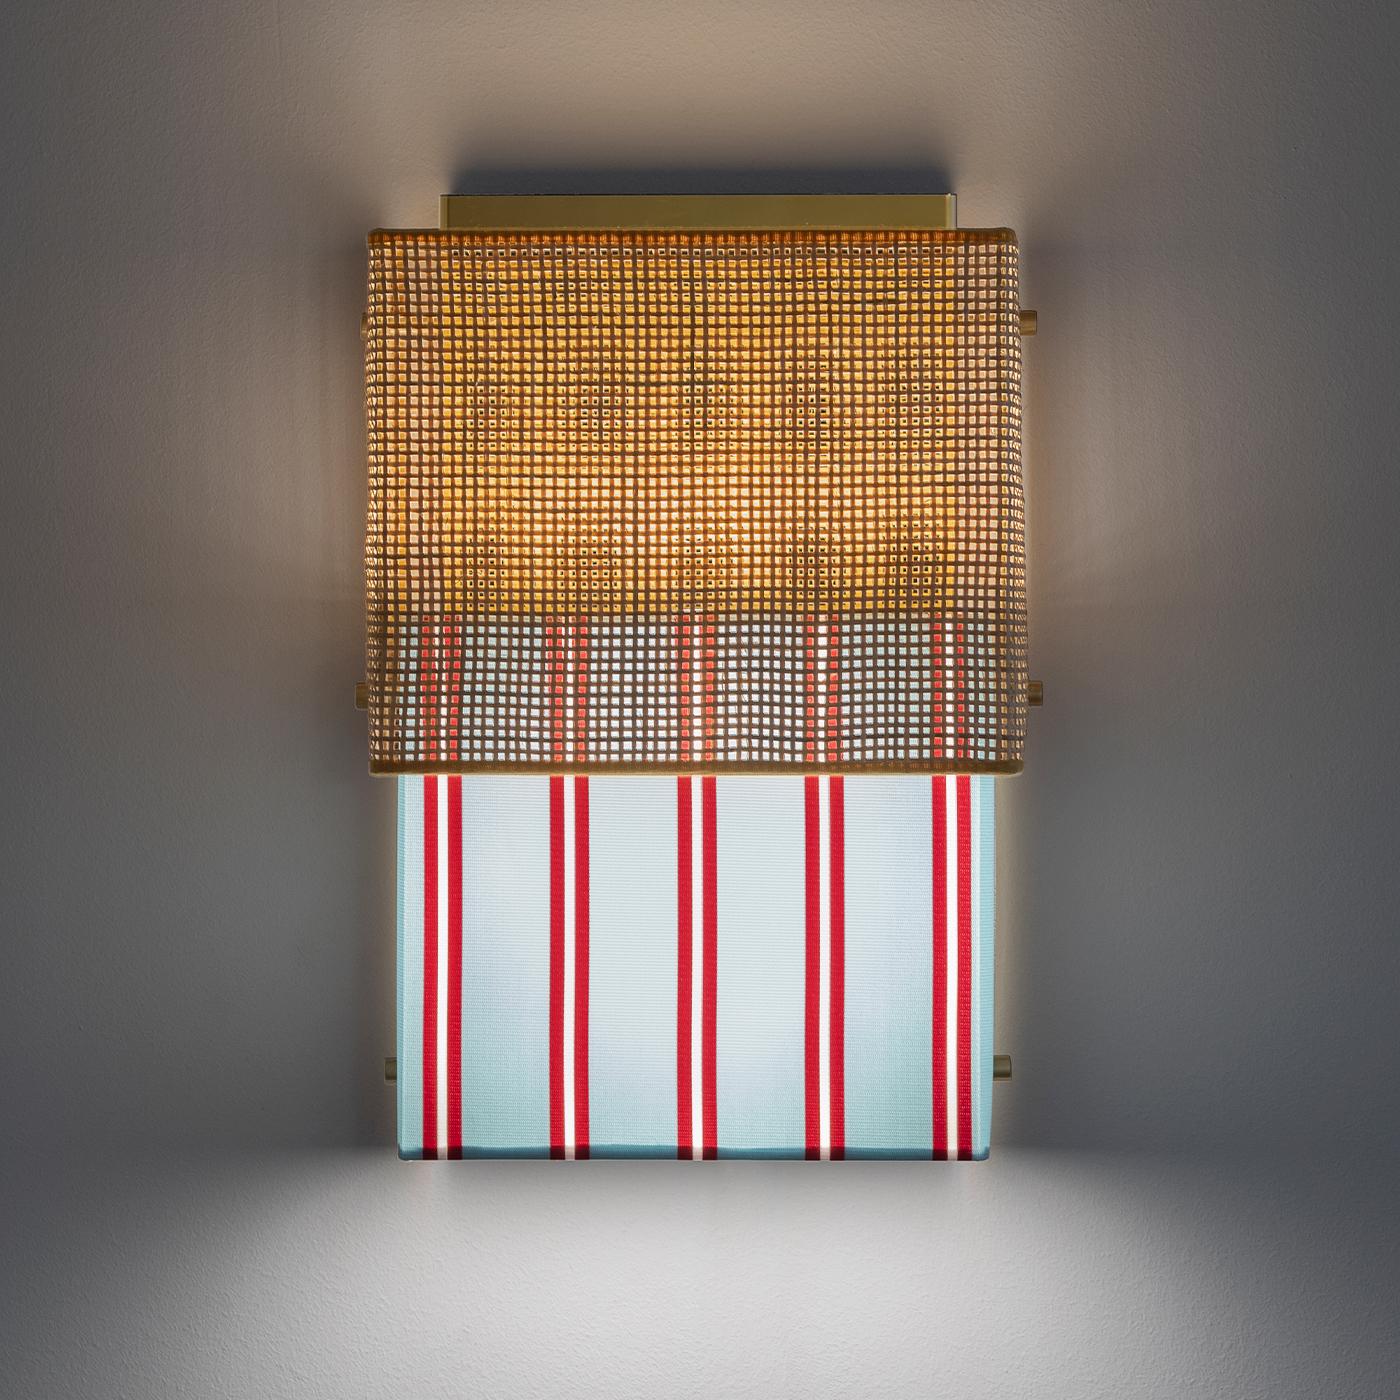 This elegant, whimsical wall lamp is made from a surprising combination of contrasting textures and textiles. A rough rattan surface sits above smooth Trevira fabric in light-blue, red and white stripes. This two-piece design was inspired by the